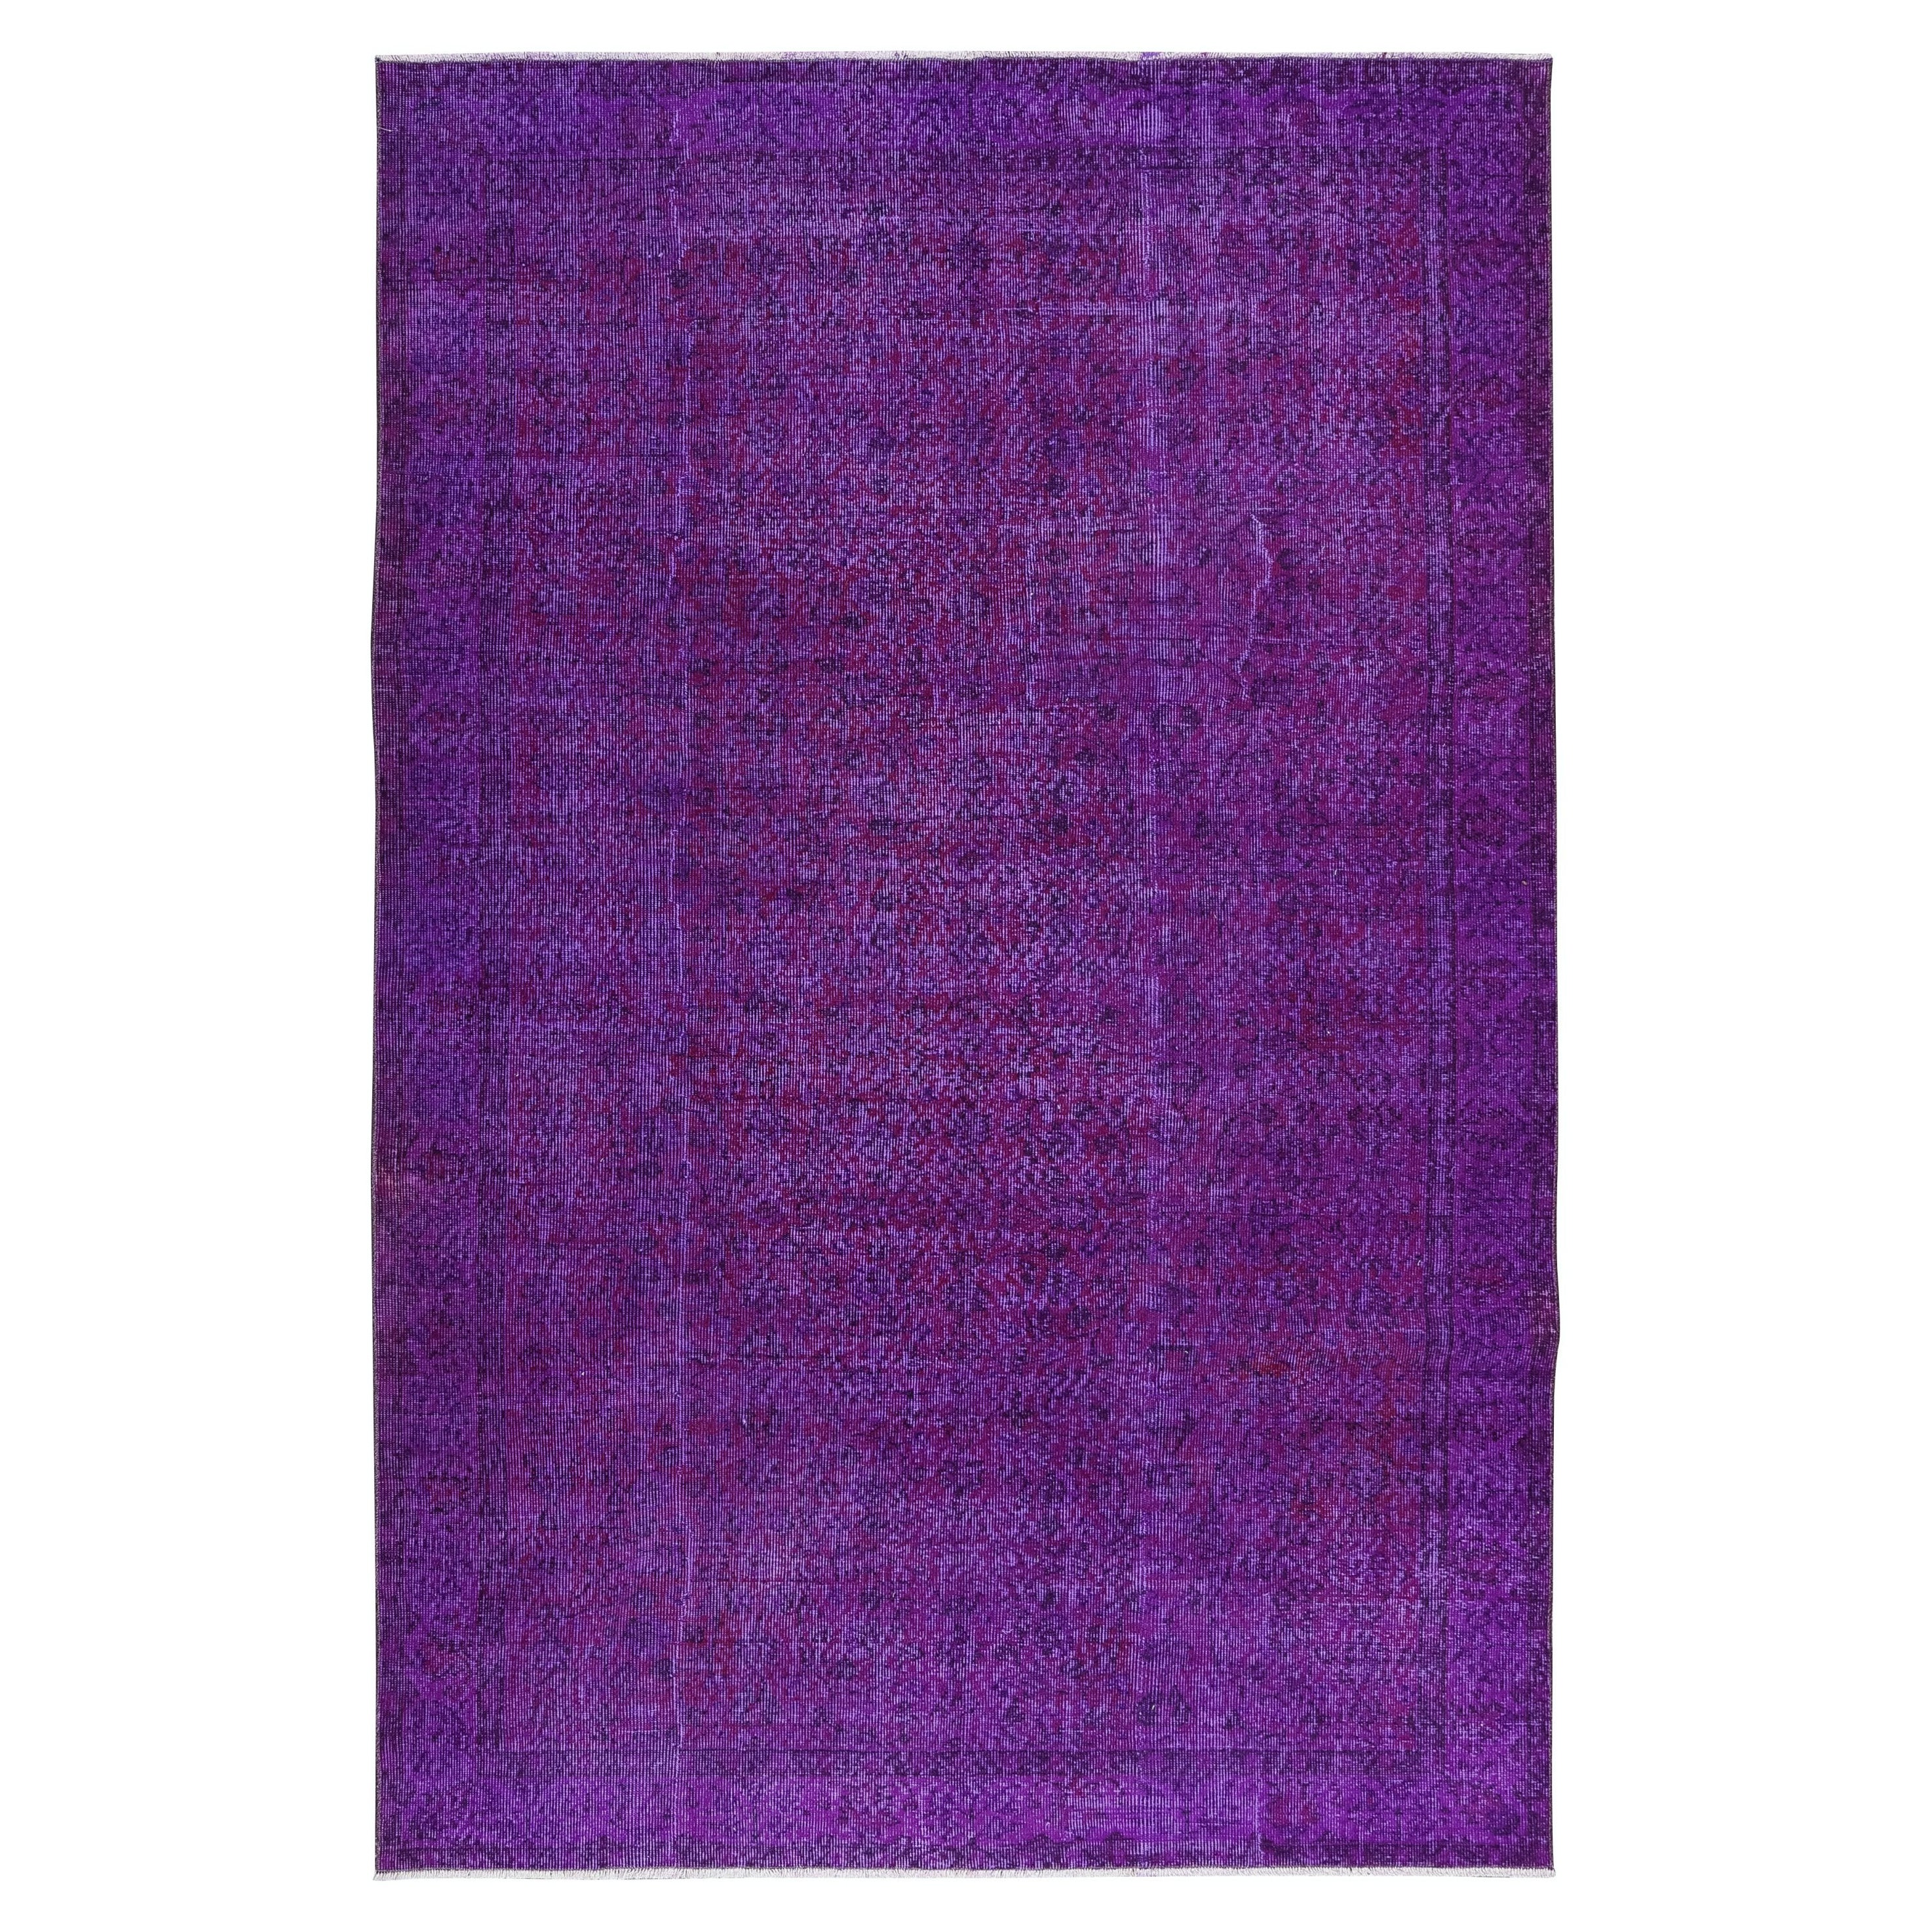 6.3x9.6 Ft Contemporary Wool Area Rug in Purple, Hand-Knotted in Turkey